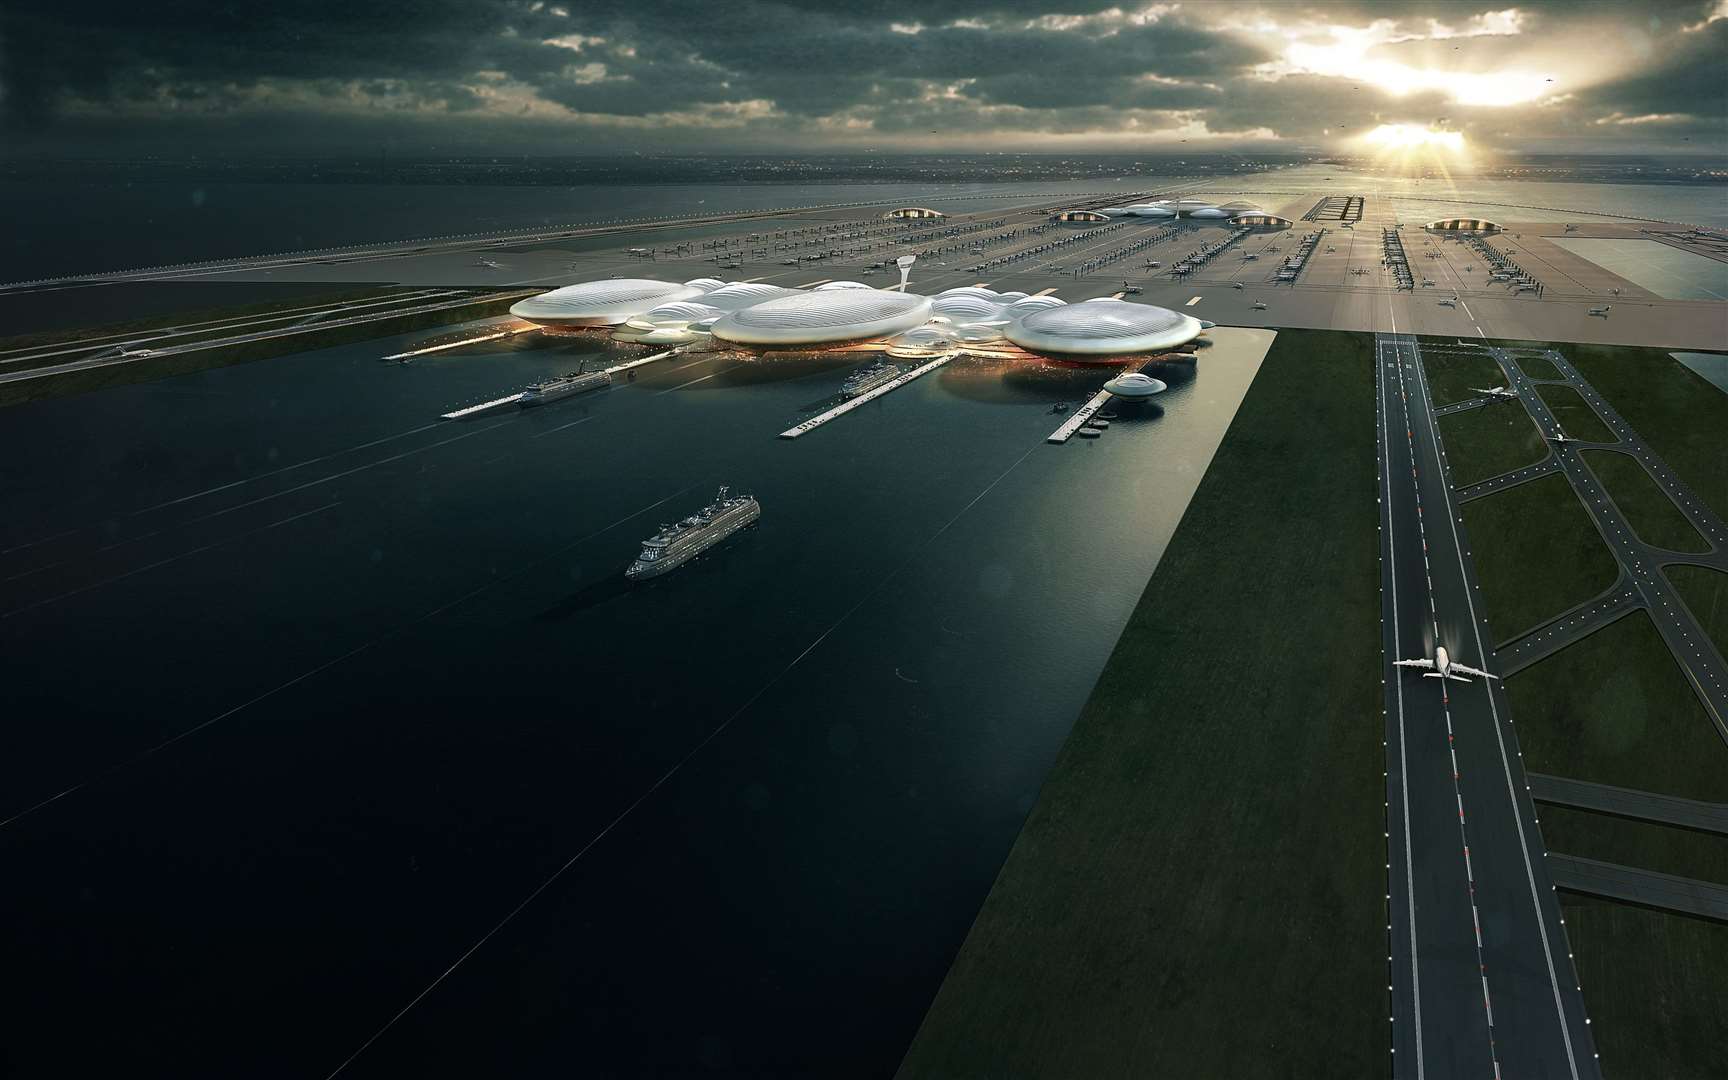 An artist's impression of London Britannia airport in the Thames Estuary - one of the many futuristic designs for what was dubbed 'Boris Island'